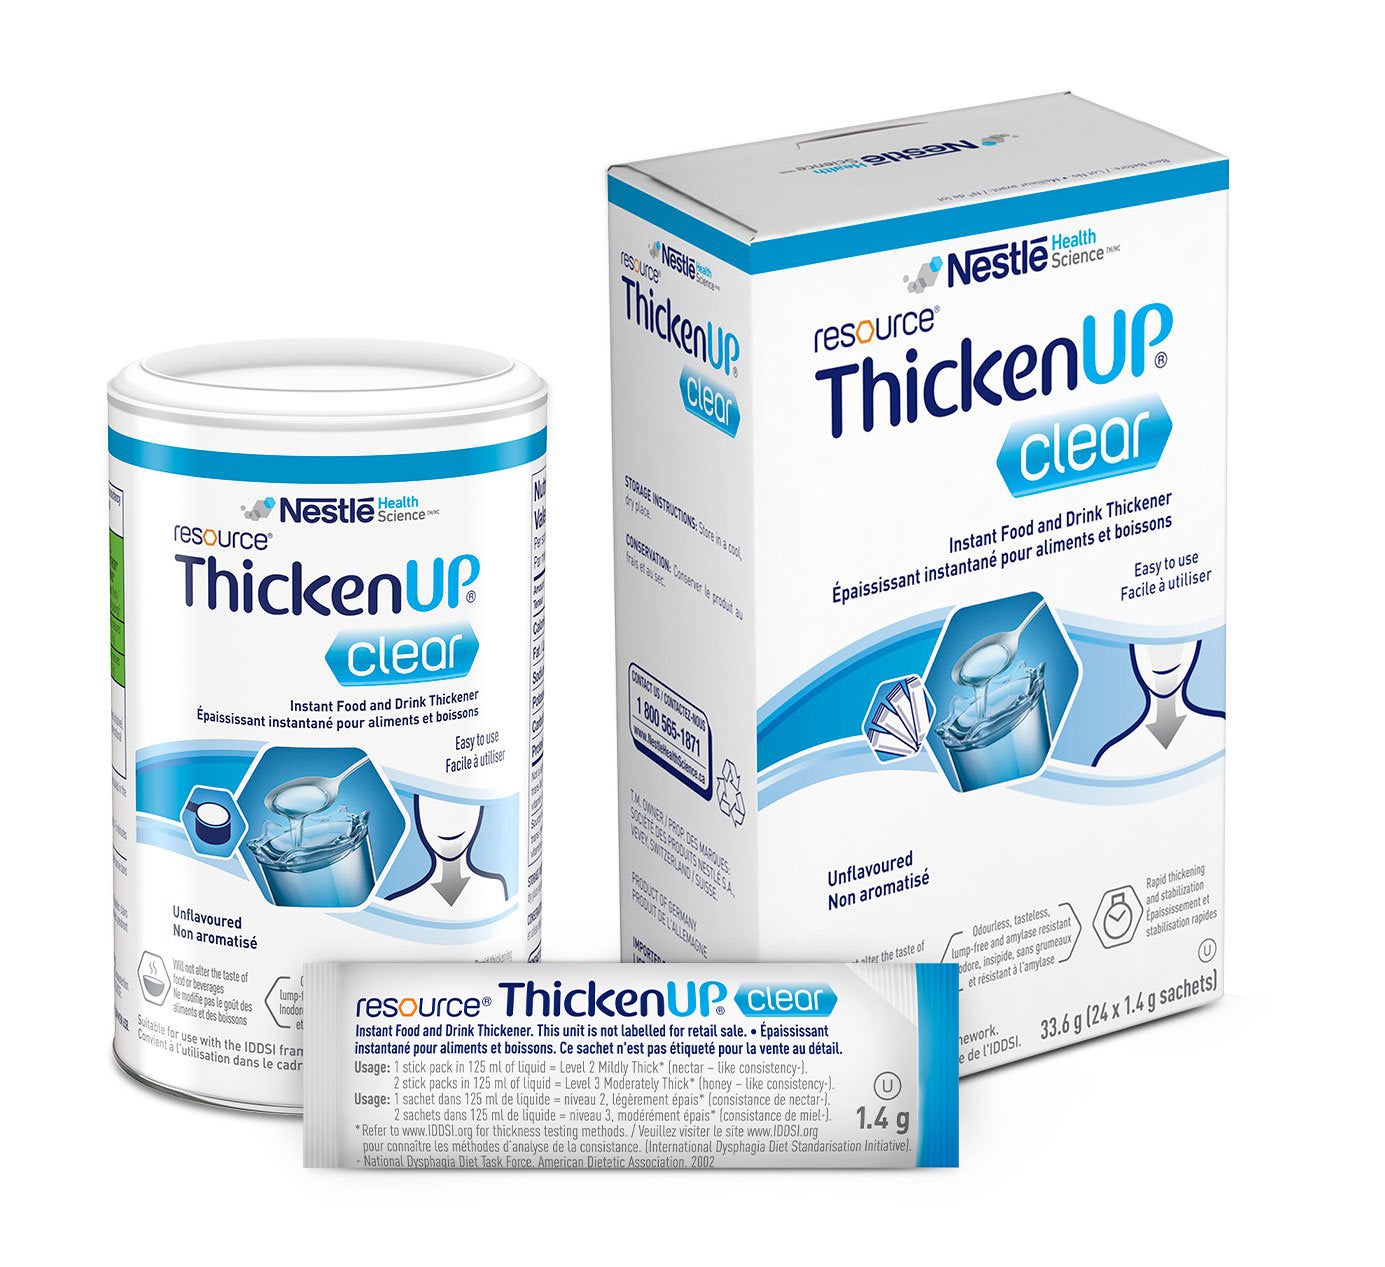 thickenup clear logo